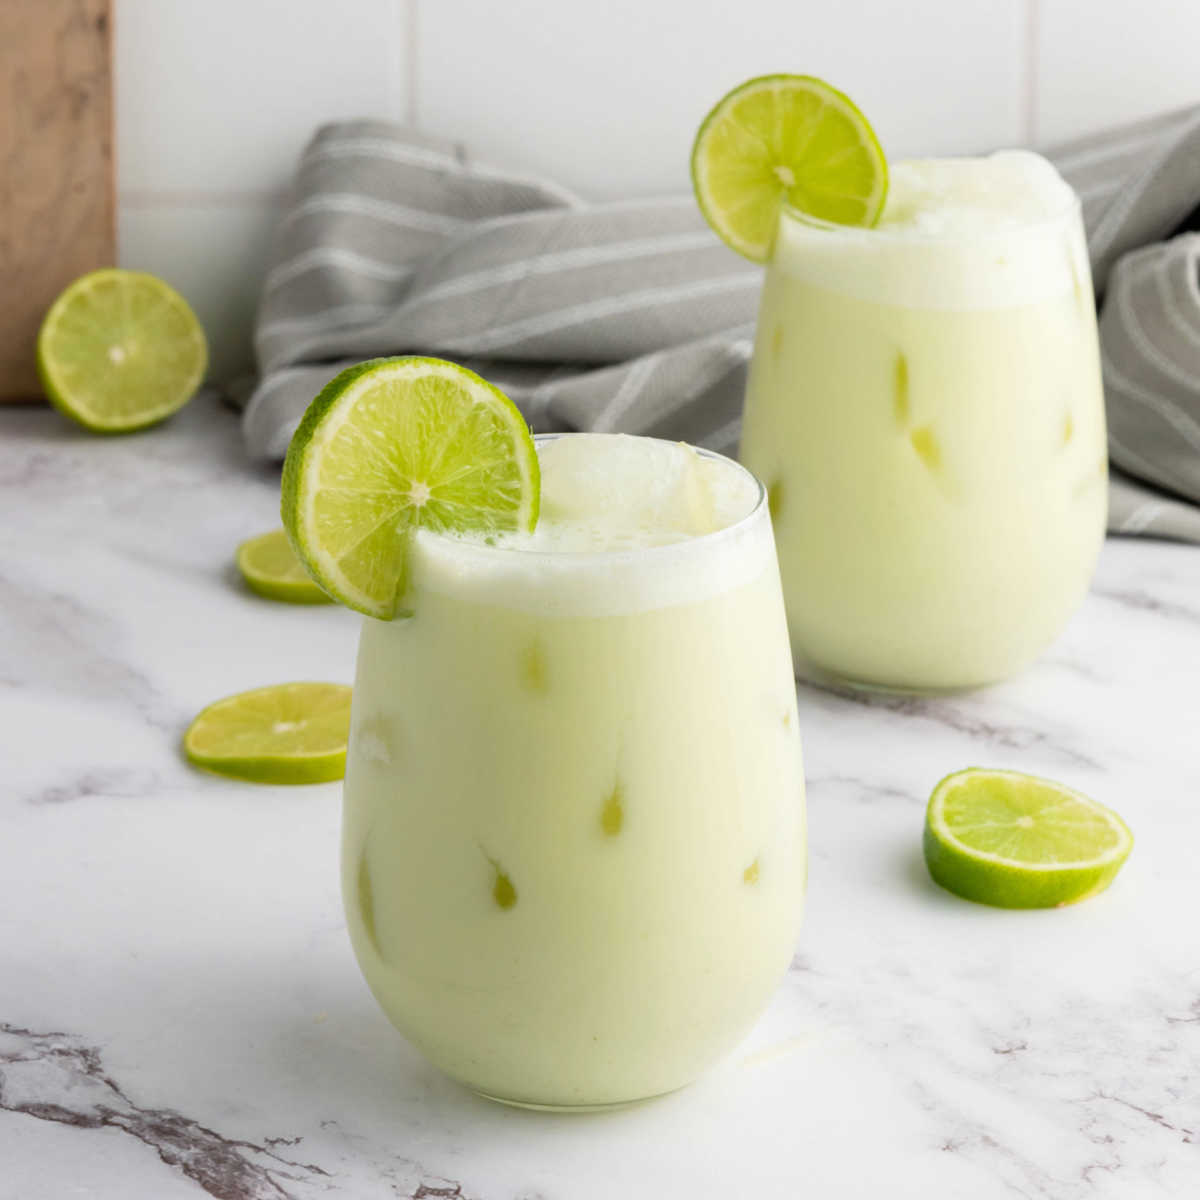 Two glasses filled with creamy limeade, plenty of ice and garnished with a slice of lime, ready to drink.